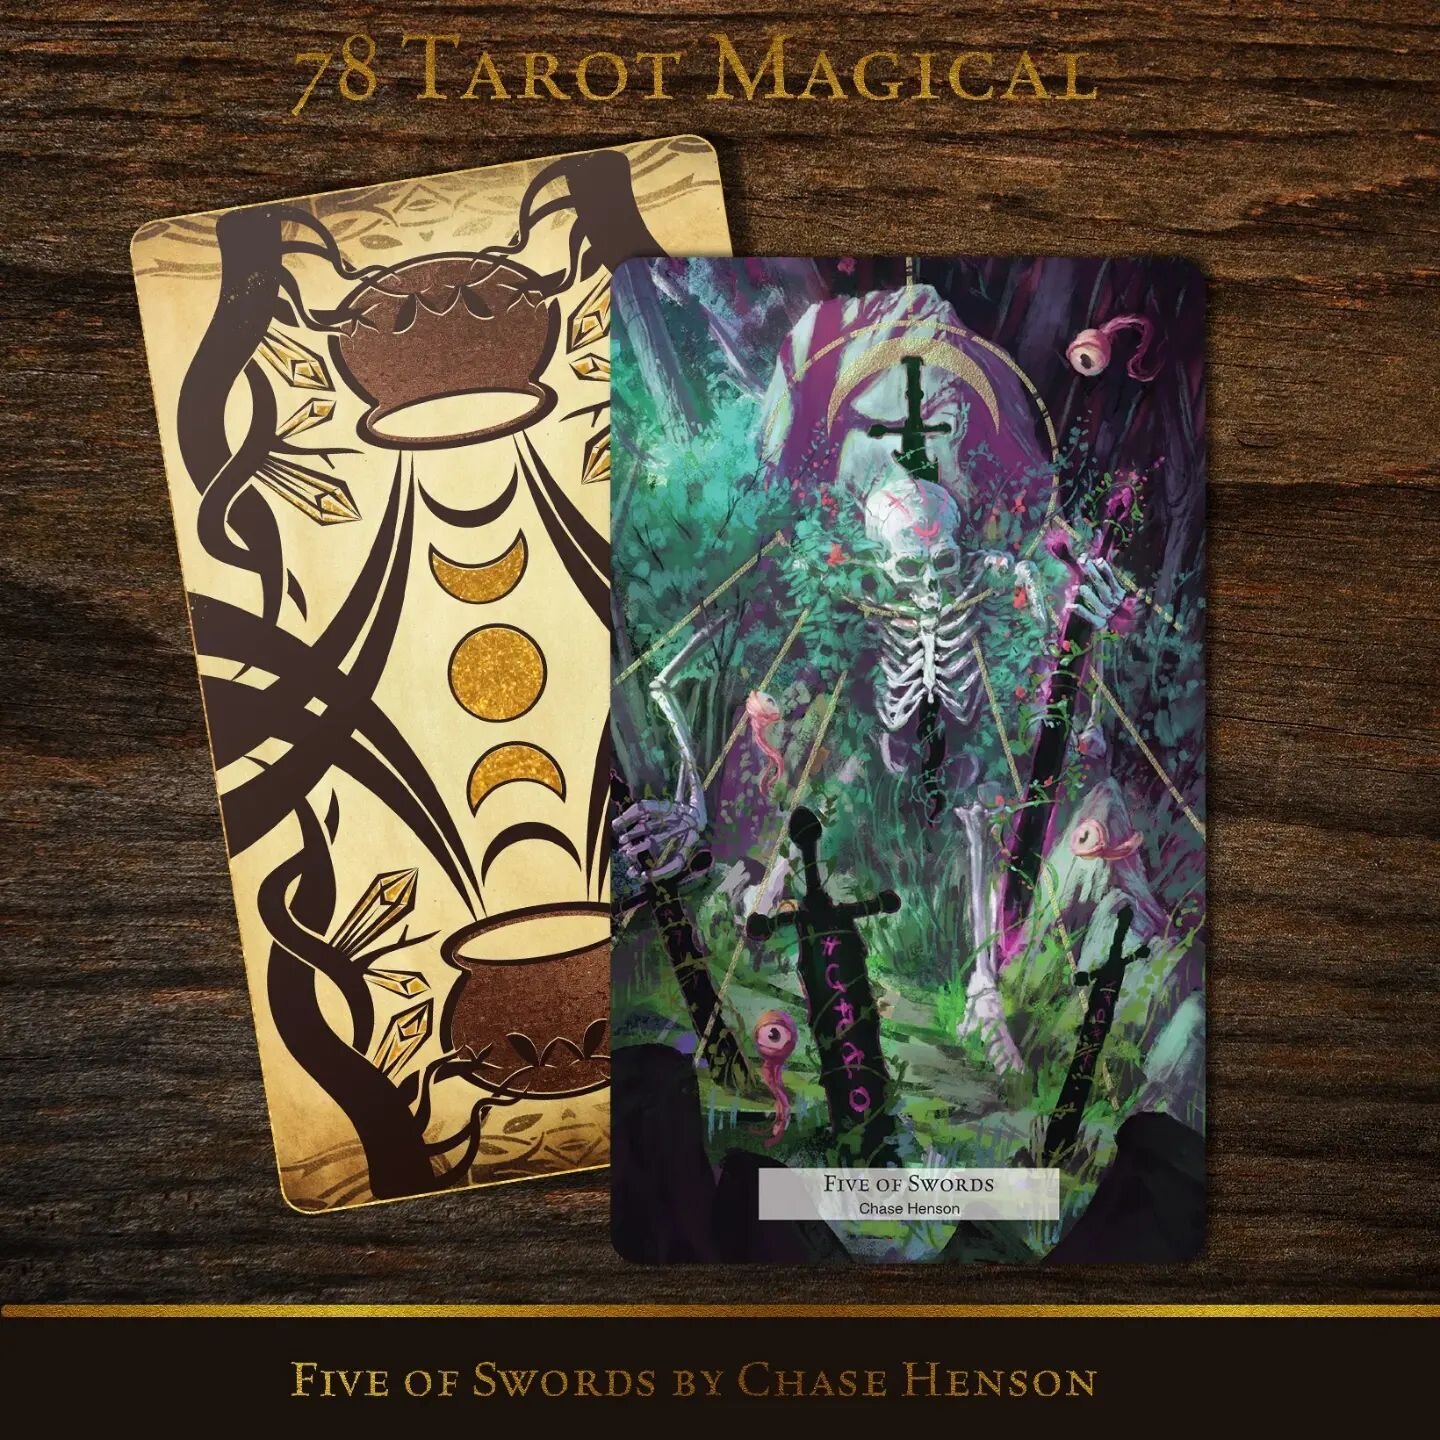 @78tarot just launched their kickstarter for this tarot deck! Go to the page to get to the kickstarter! I can't wait to work with them again!